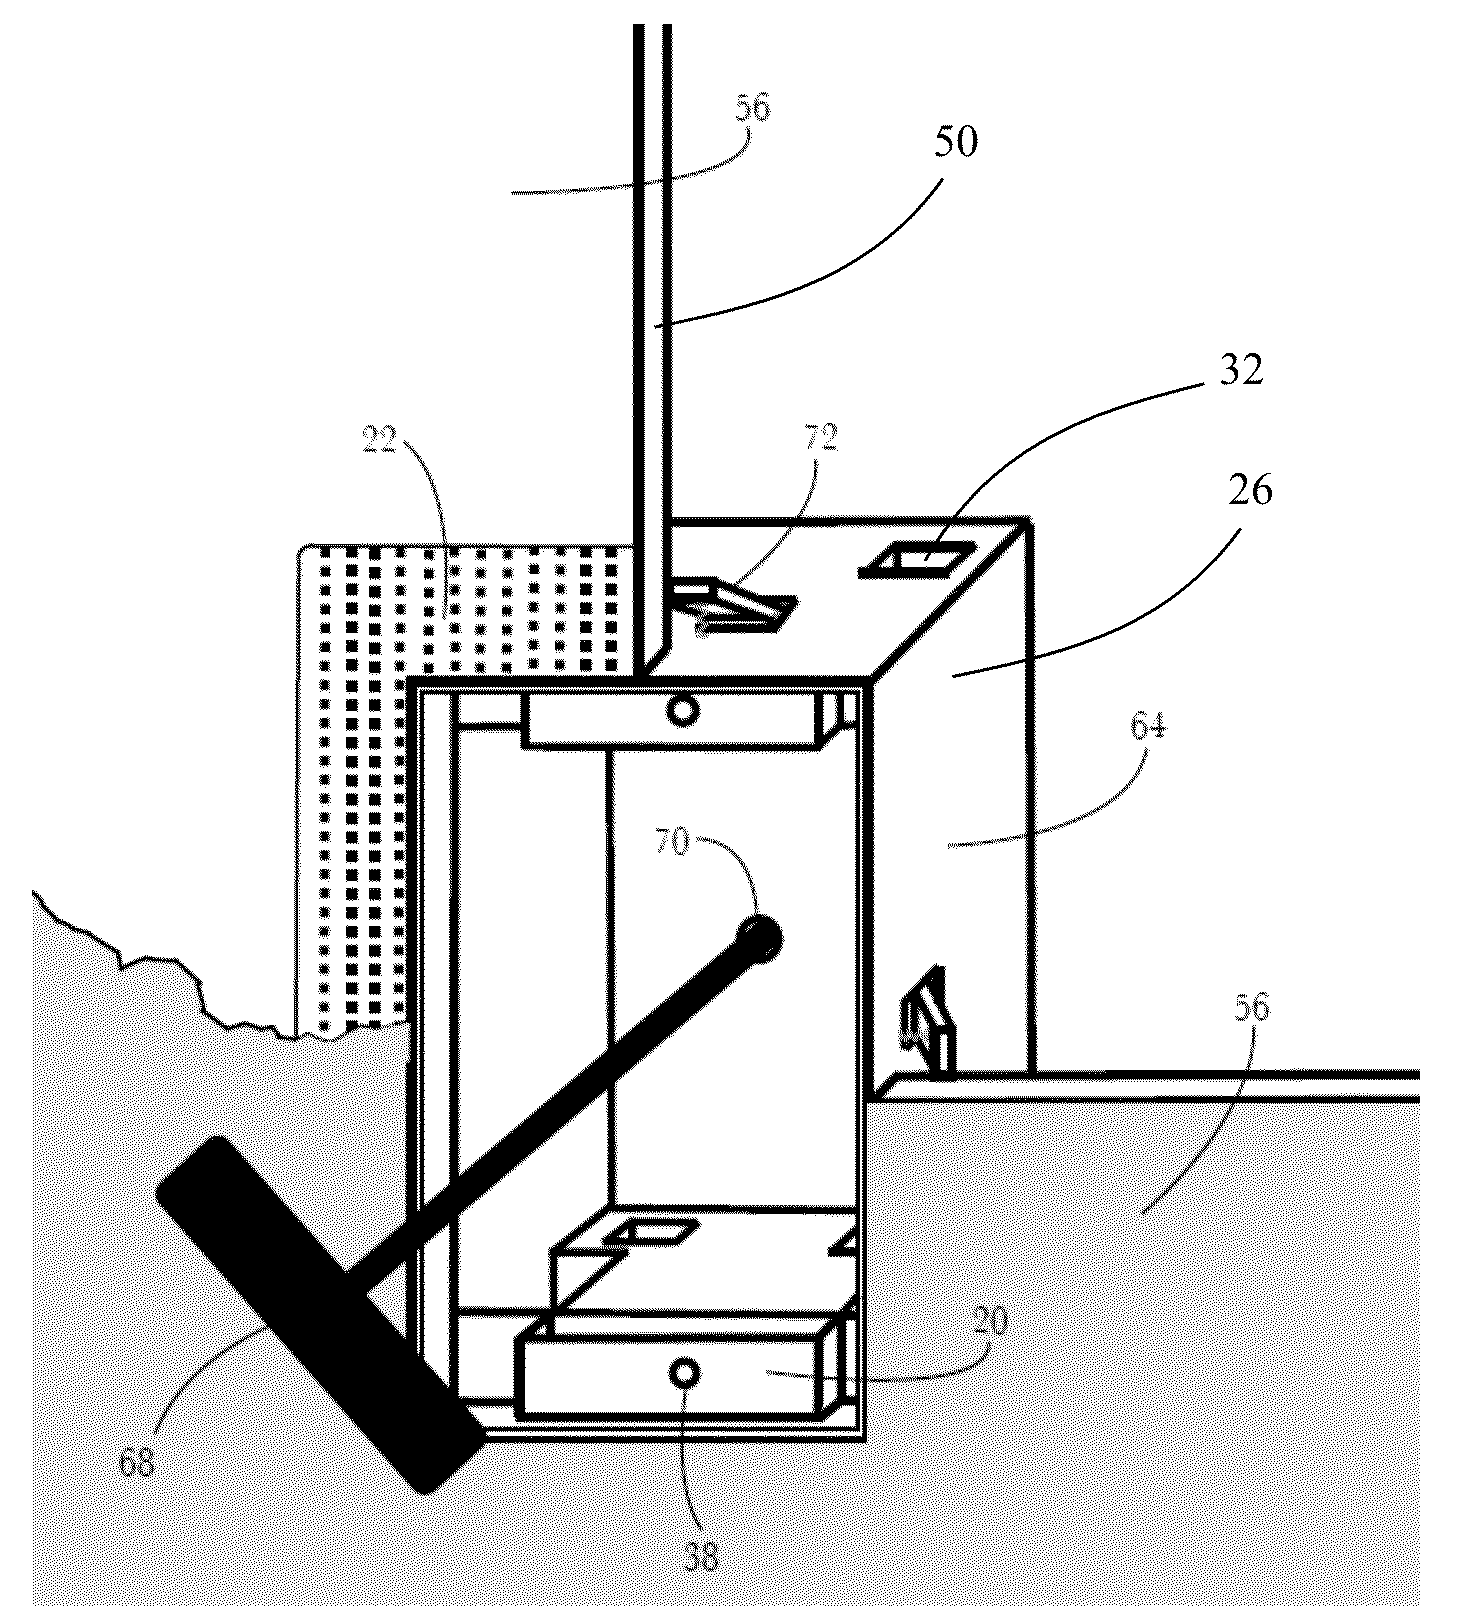 Adjustable wall enclosure for electrical devices and the like